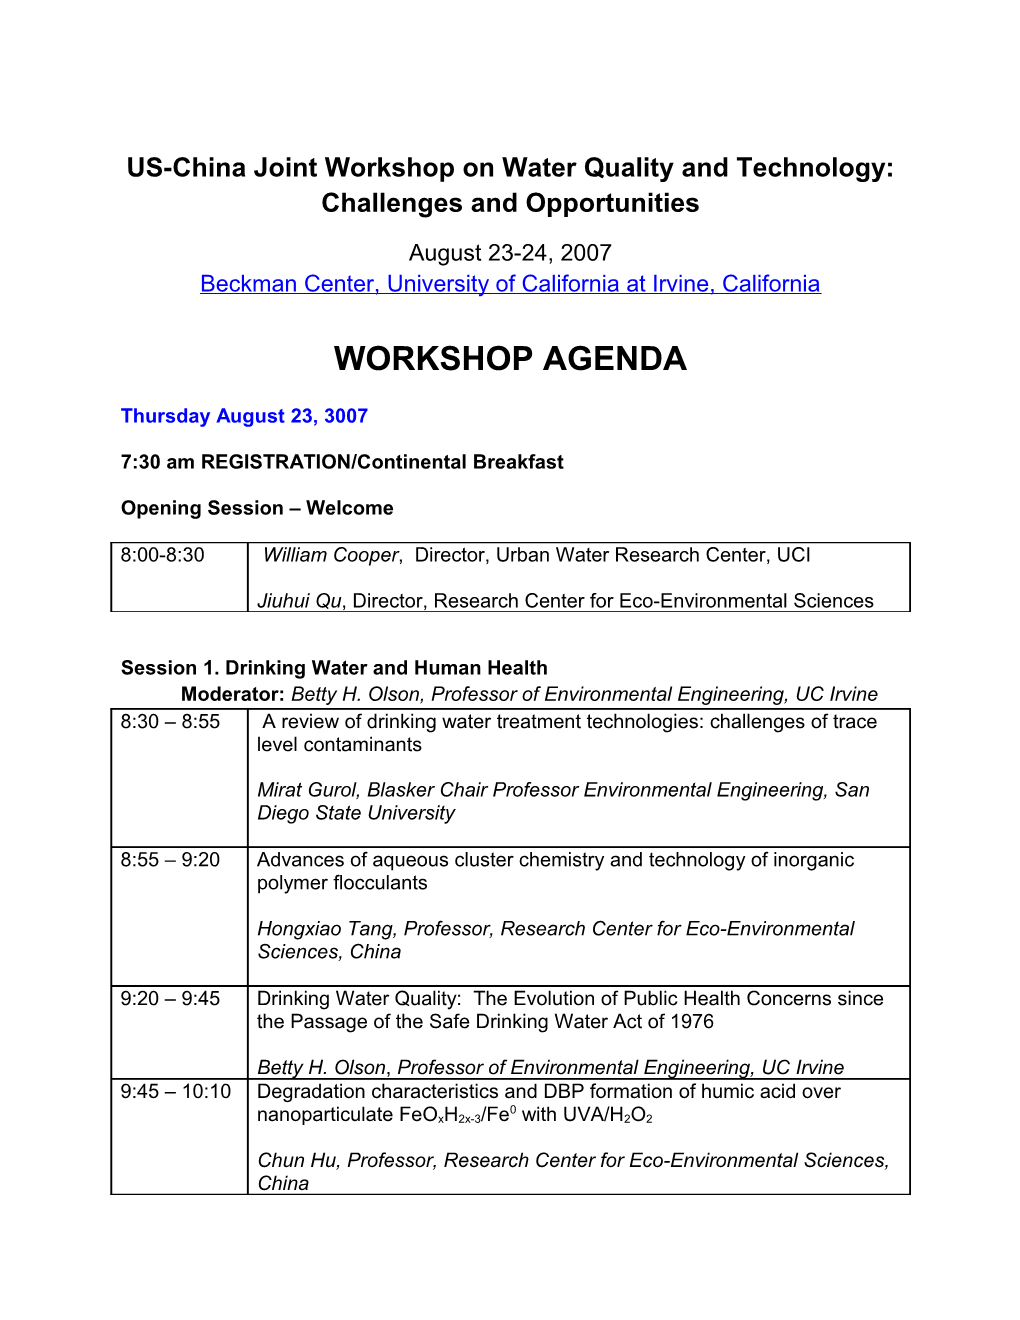 US-China Joint Workshop on Water Quality and Technology: Challenges and Opportunities